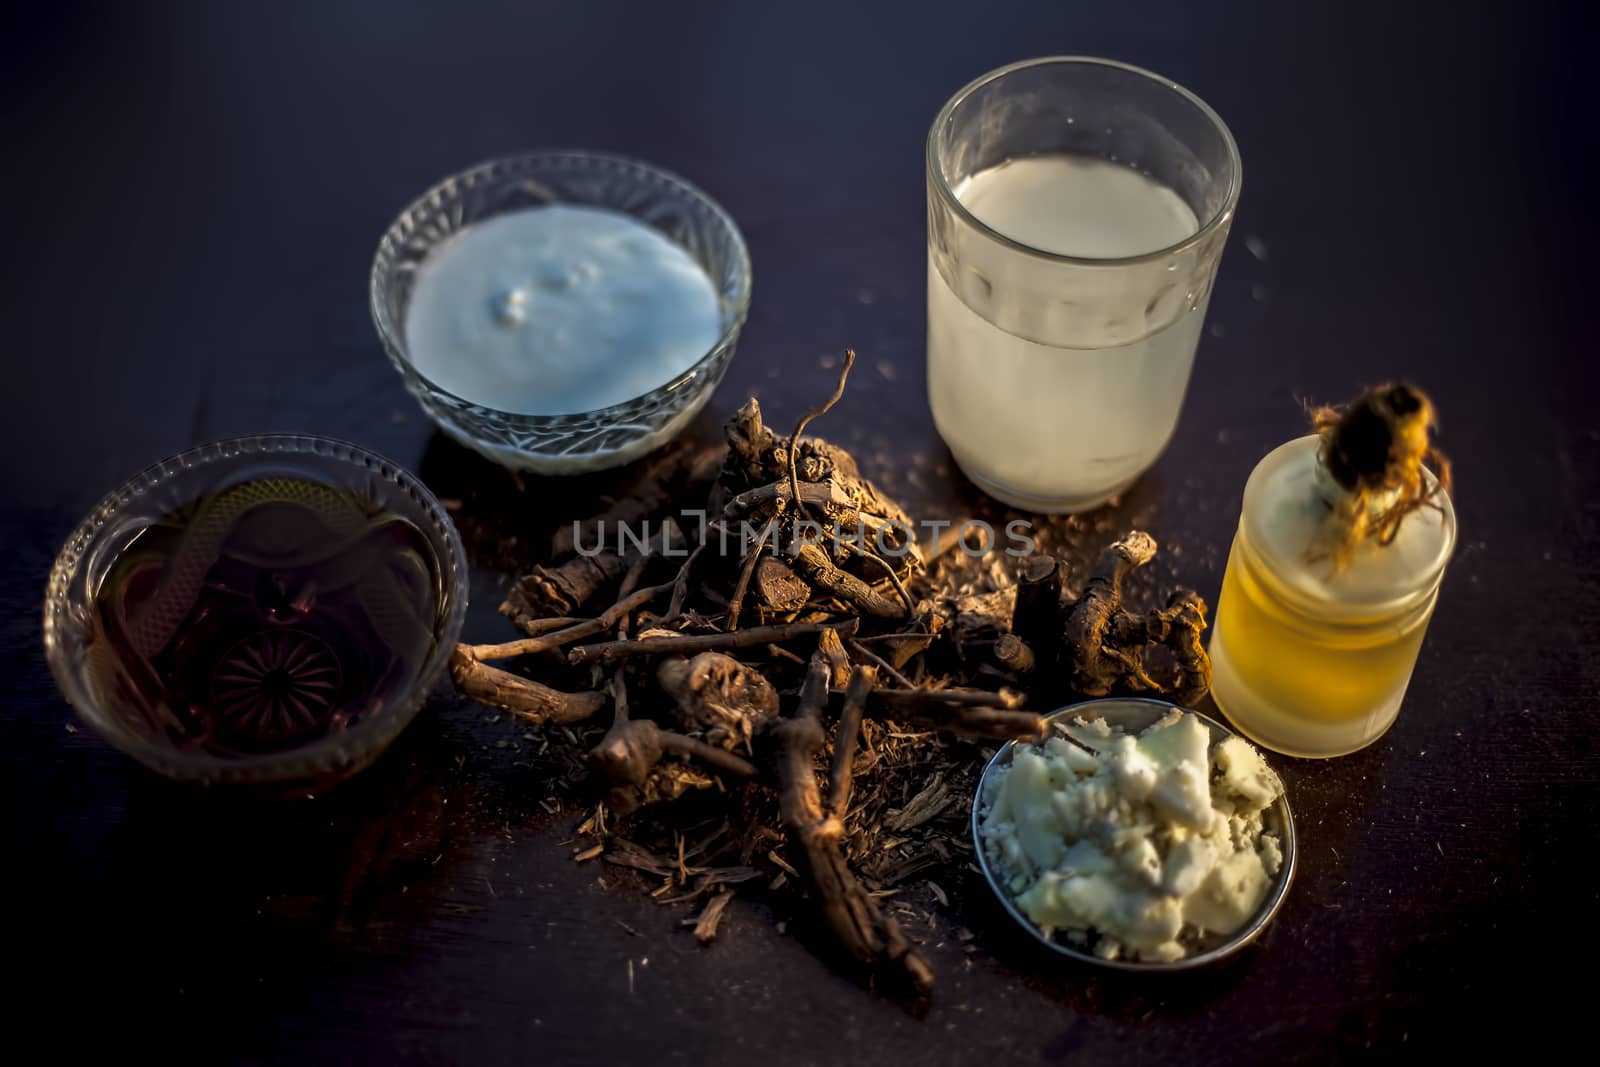 Raw ayurvedic herb chitrak/Plumbago zeylanica roots on the brown-colored shiny surface with some buttermilk, ghee or clarified butter, its extract, curd, and honey with it used in ayurvedic therapy. by mirzamlk